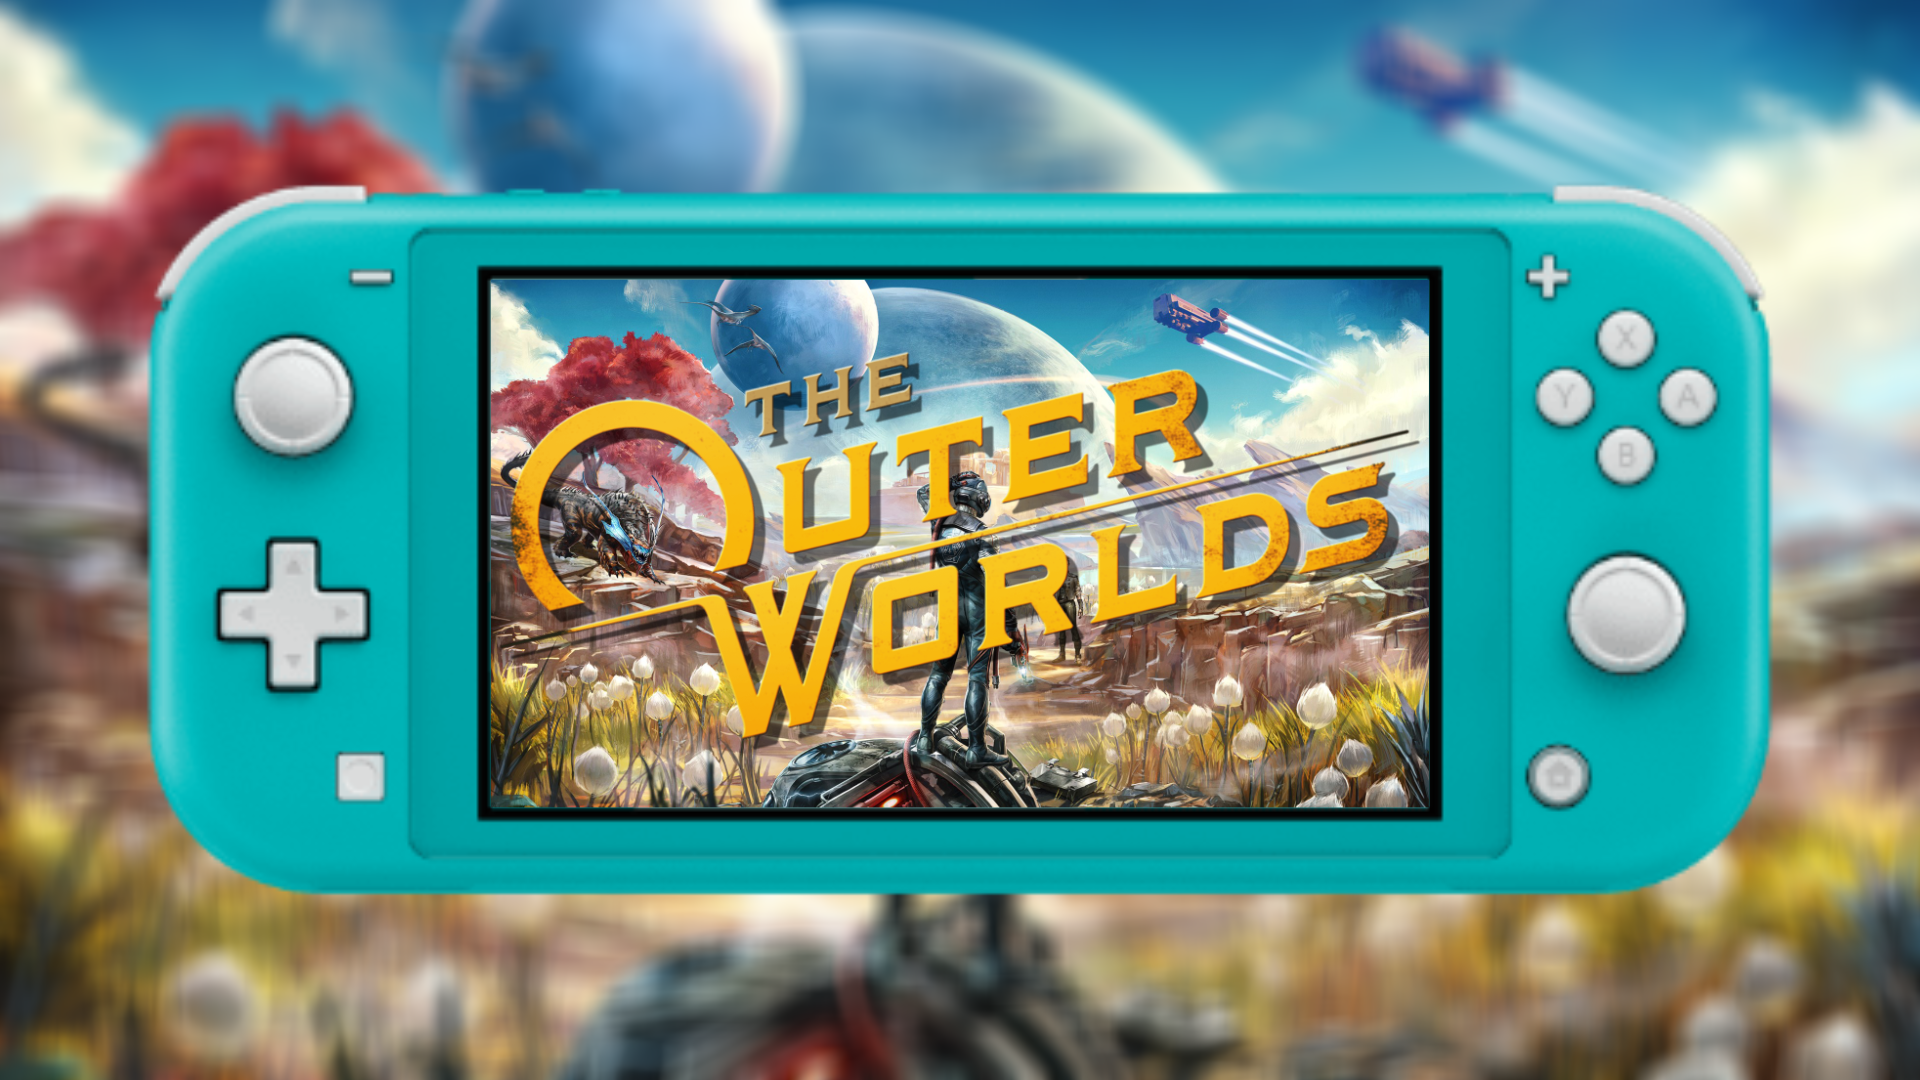 The Outer Worlds 2 Announced